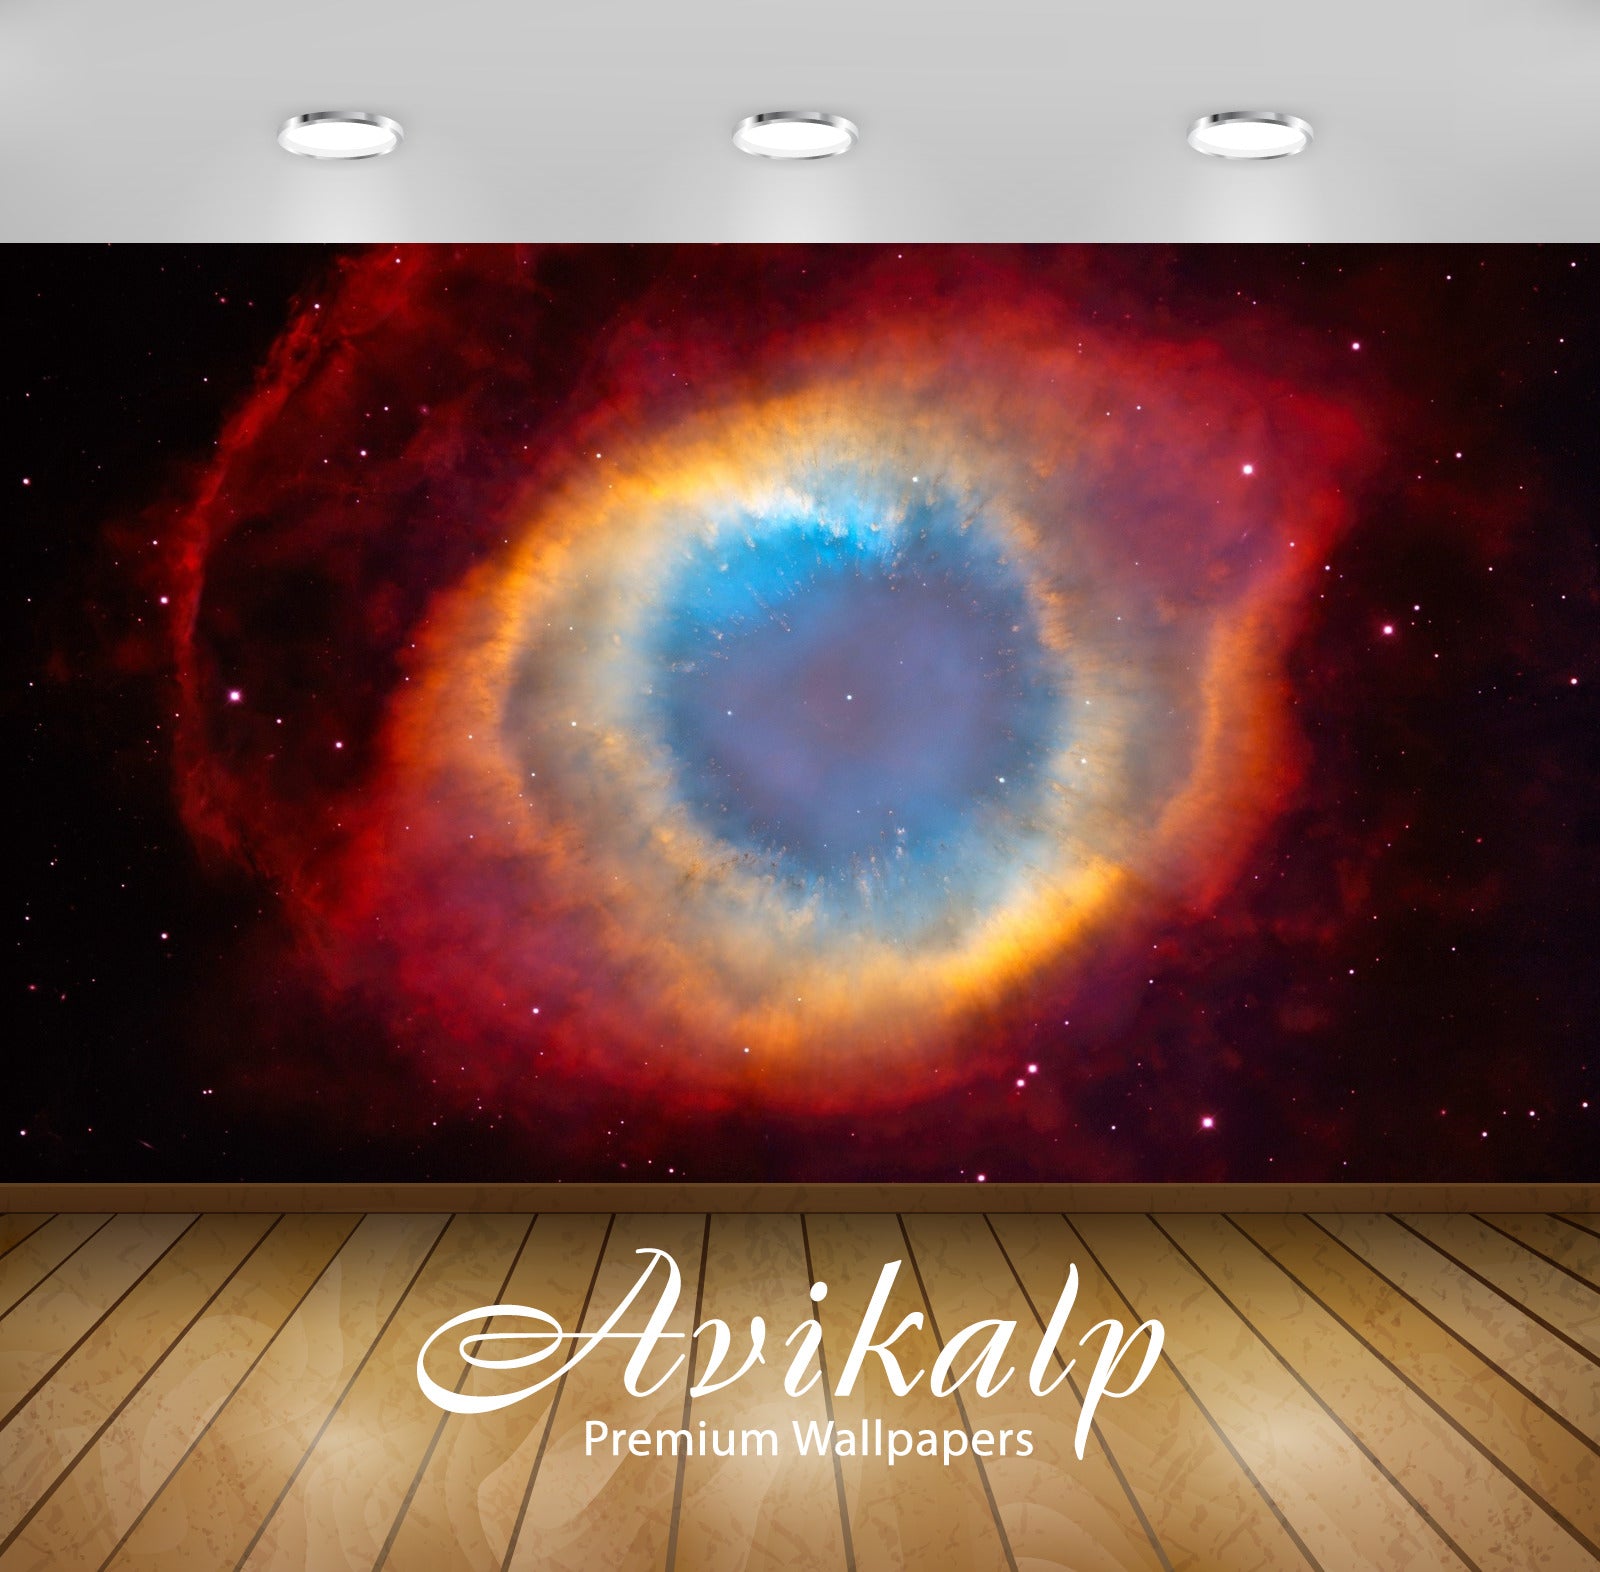 Avikalp Exclusive Awi1397 Galaxy Eye Of God Full HD Wallpapers for Living room, Hall, Kids Room, Kit